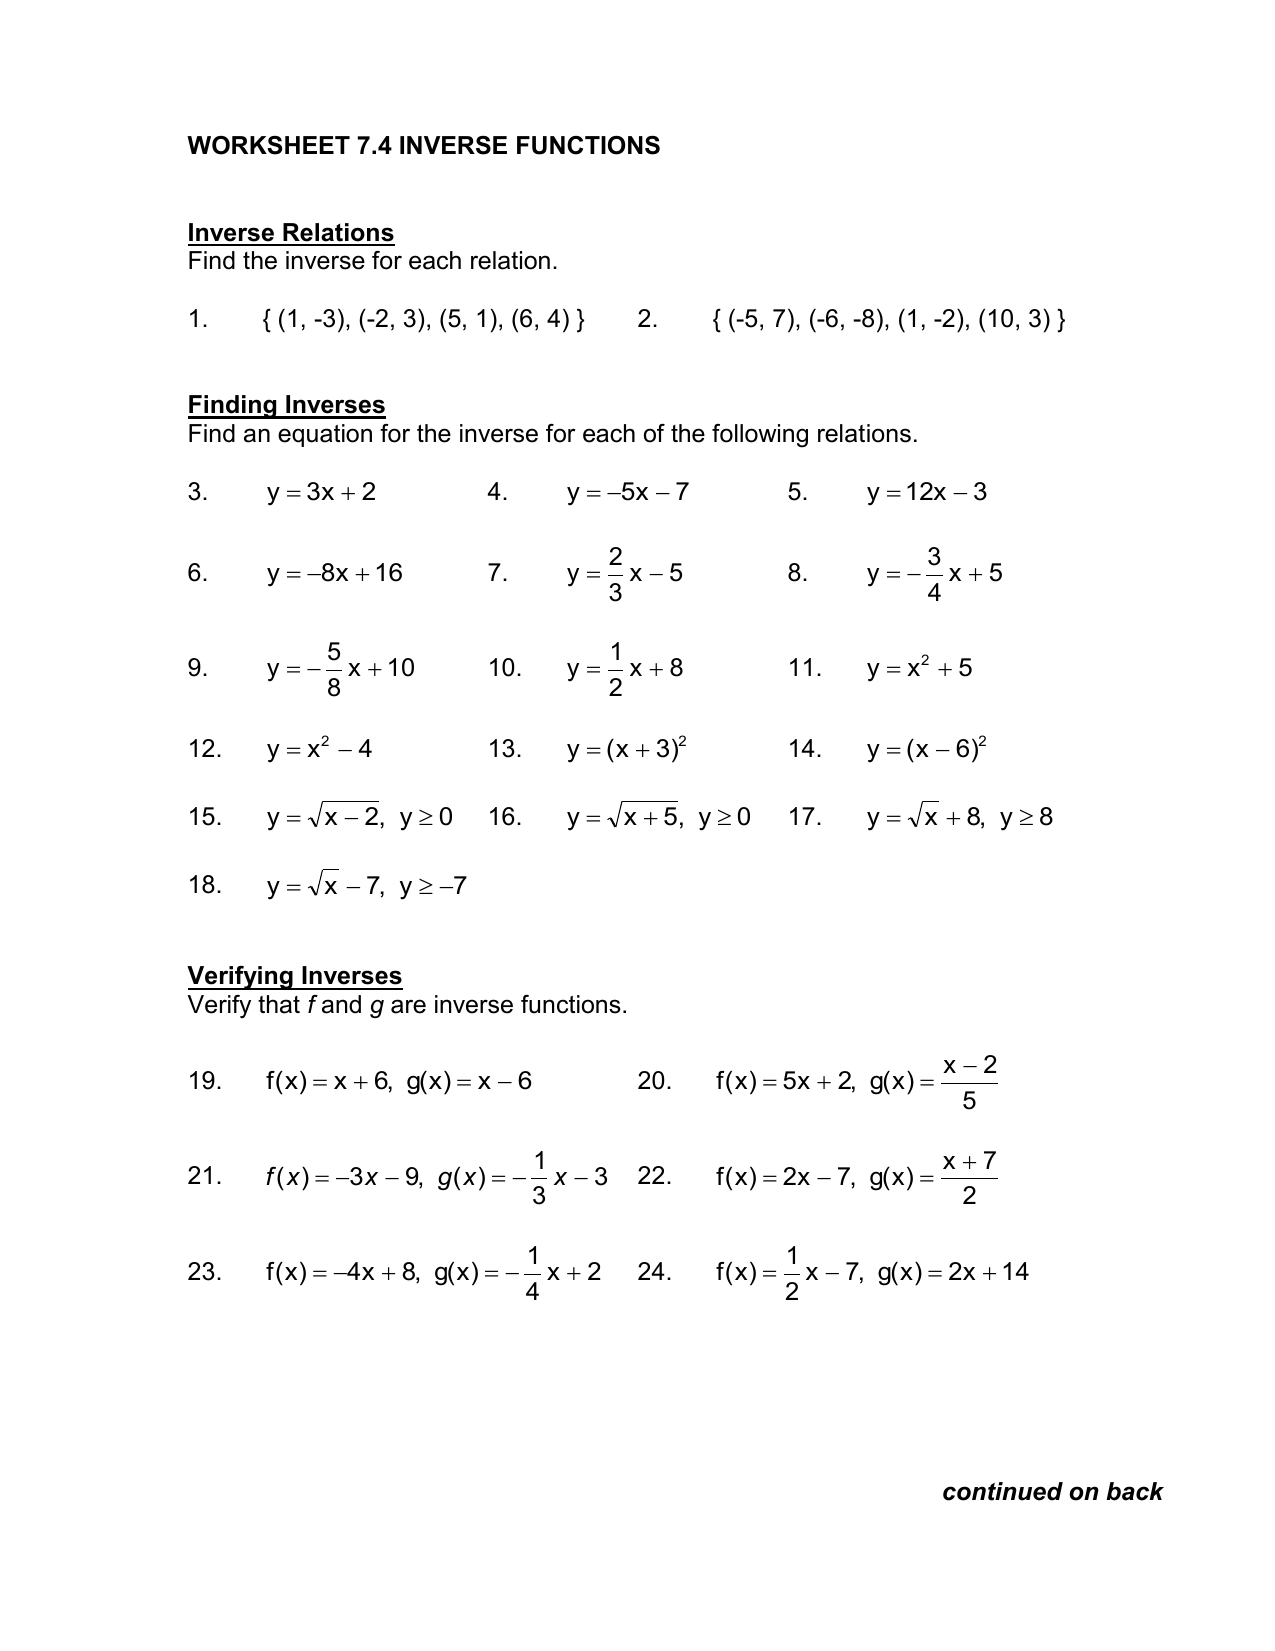 worksheet 22 22 inverse functions Pertaining To Functions And Relations Worksheet